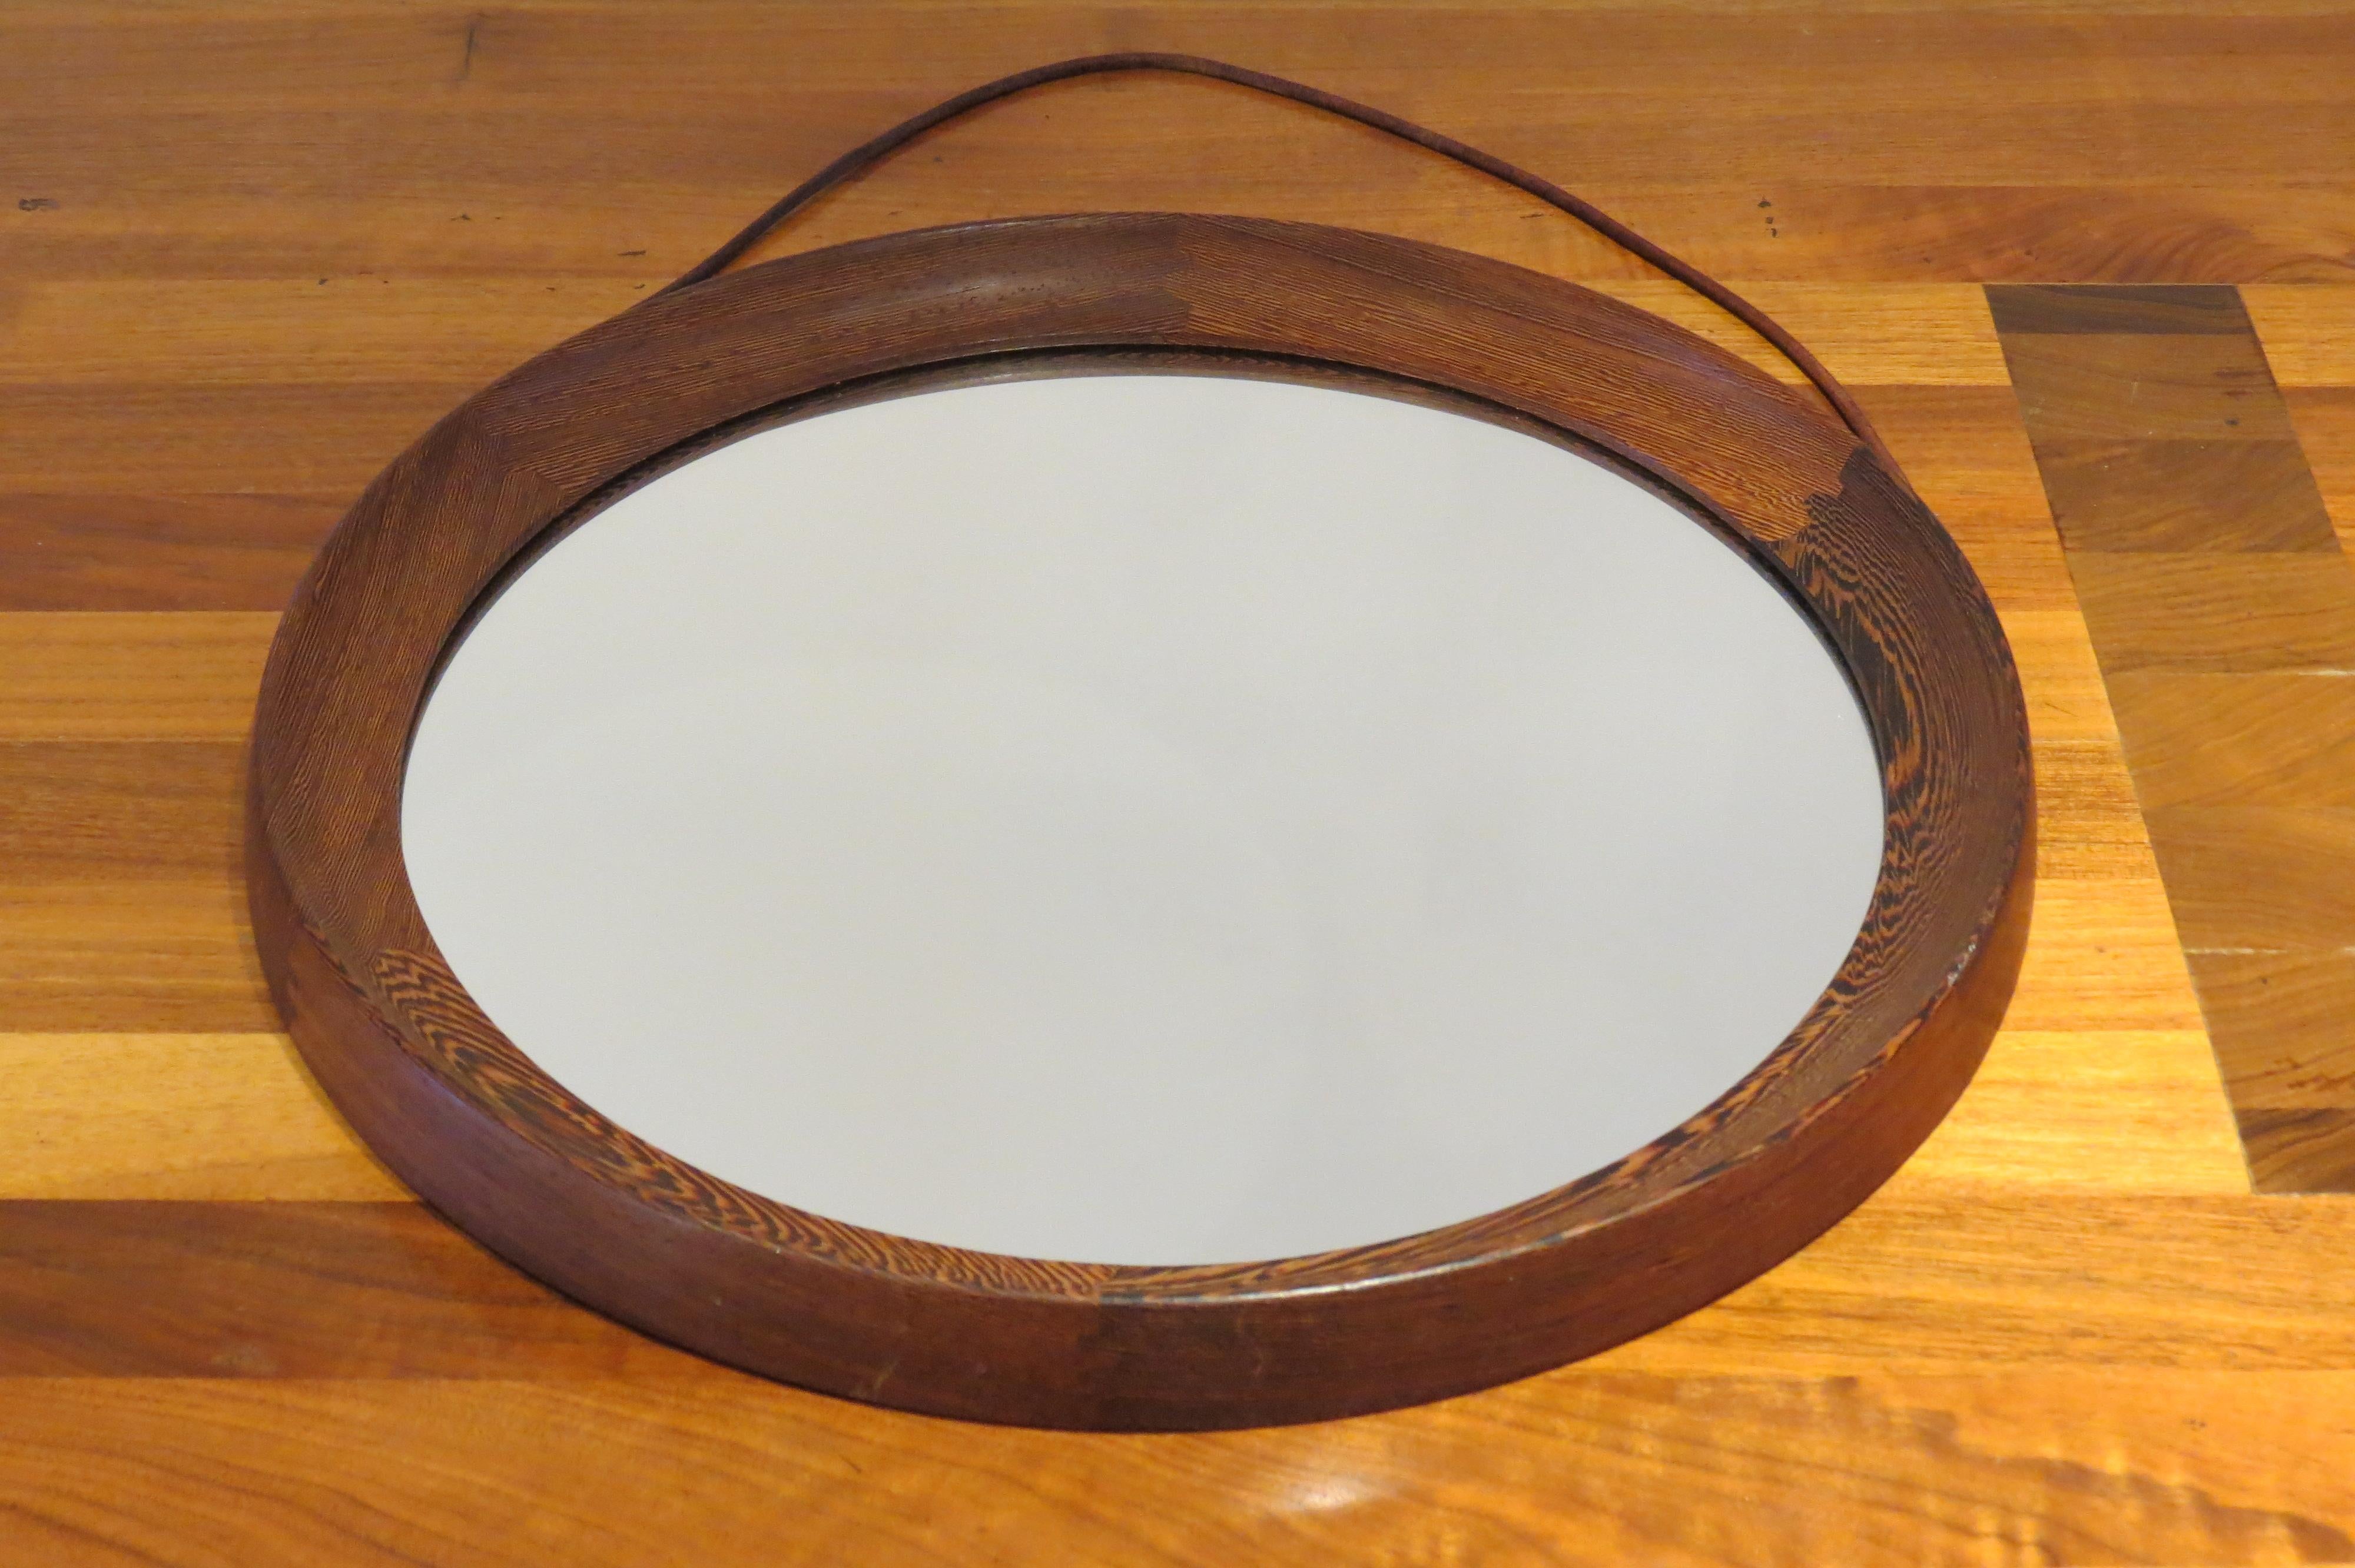 Swedish circular wall hanging mirror by Uno and Osten Kristiansson and manufactured by Luxus, Sweden.

Solid wengé with detailed joints, glass mirror plate and leather strap.

Good vintage condition.

ST732.